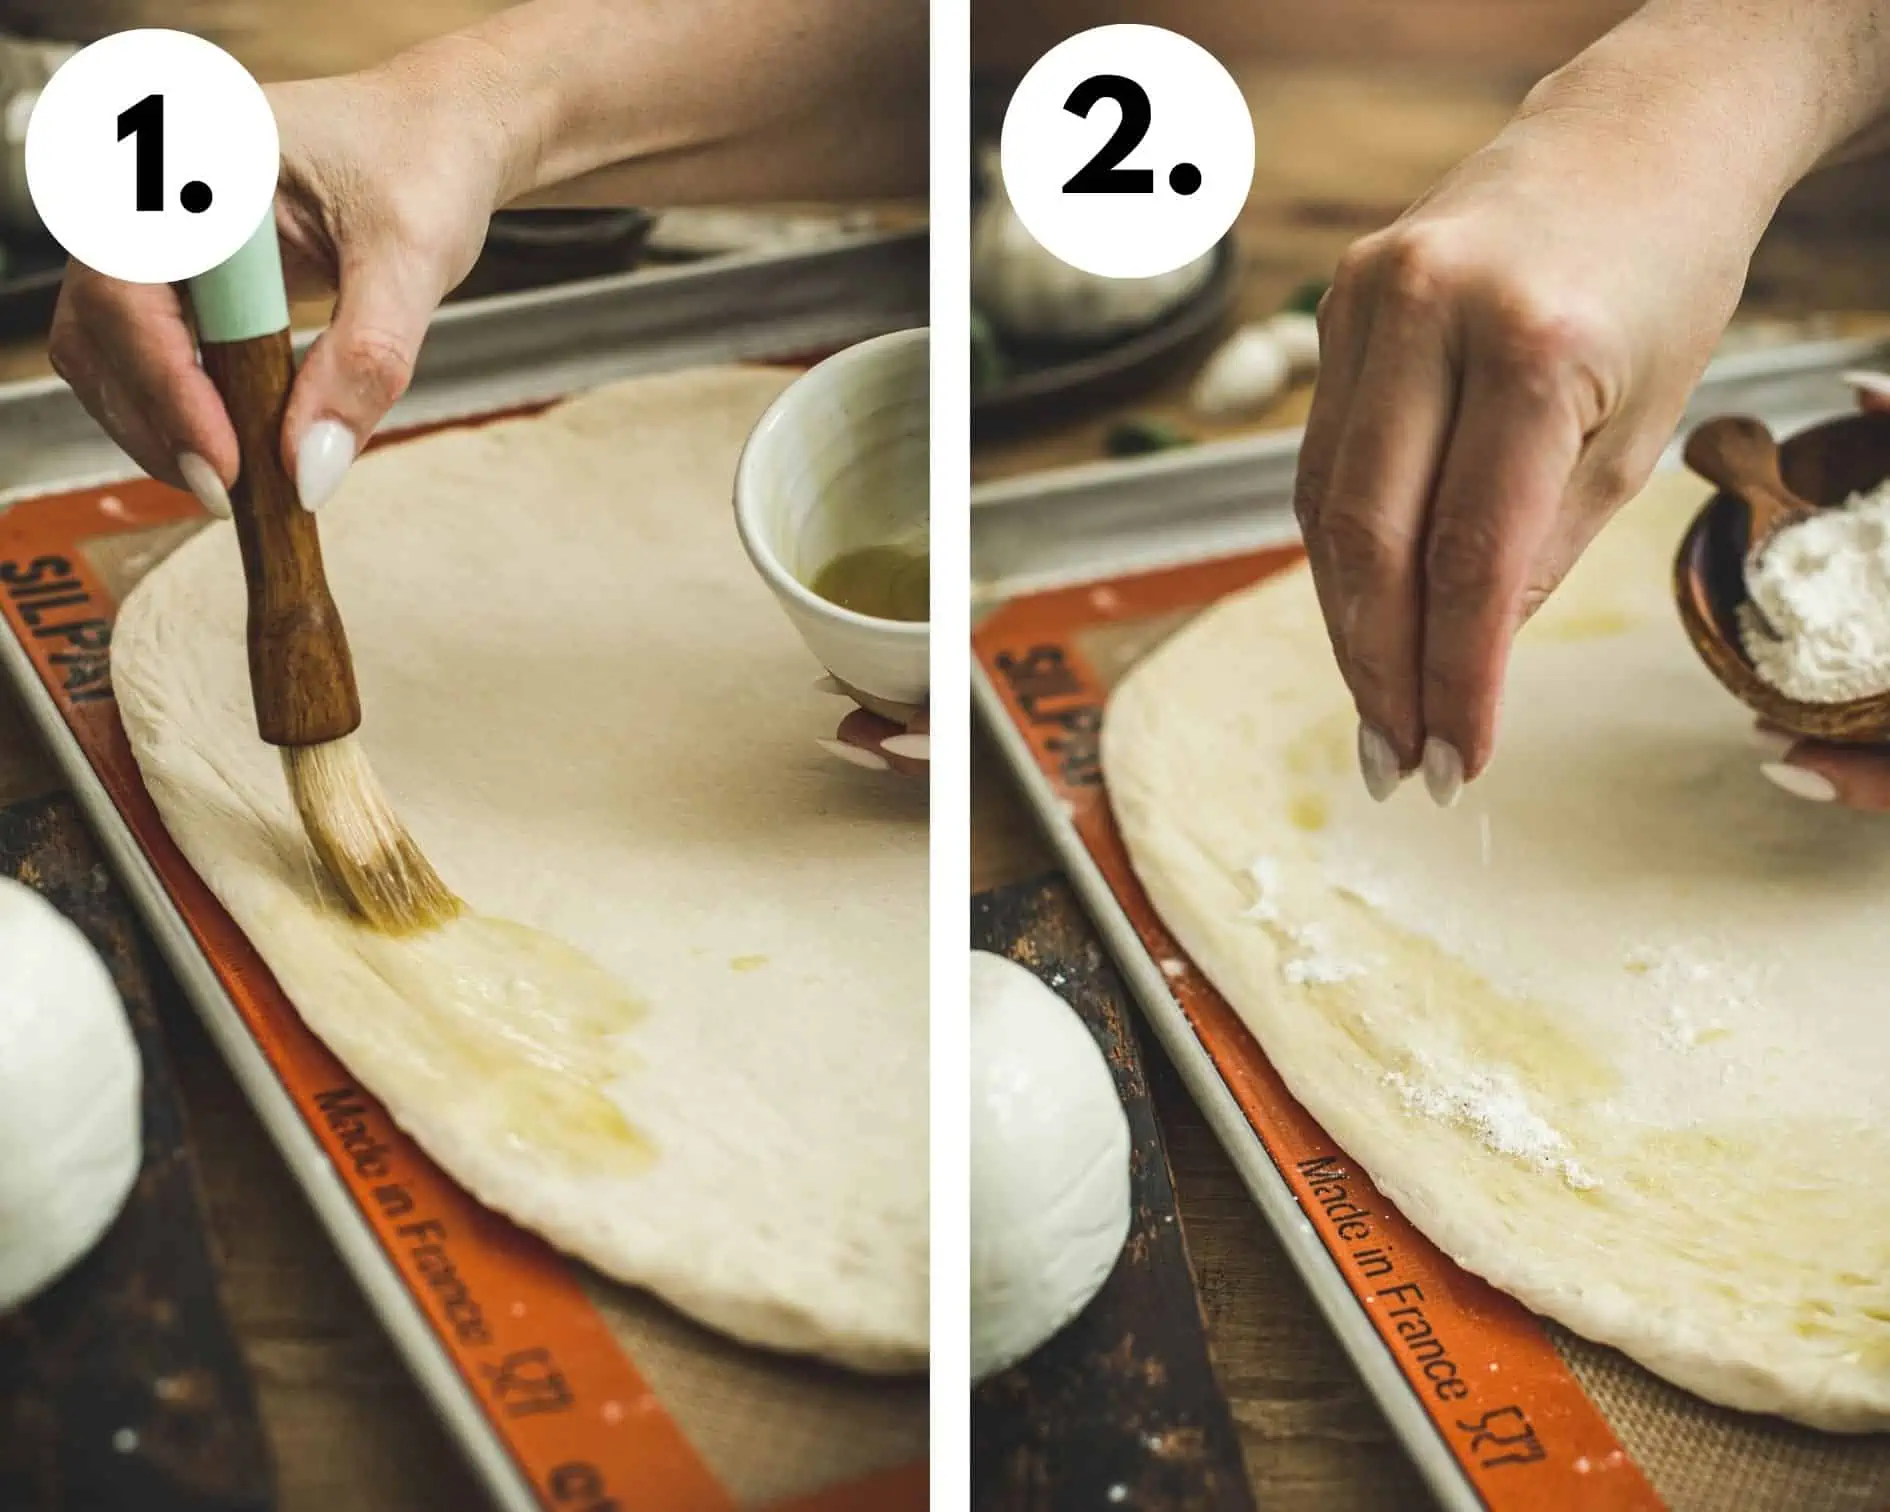 How to make Margherita pizza step 1 and 2.